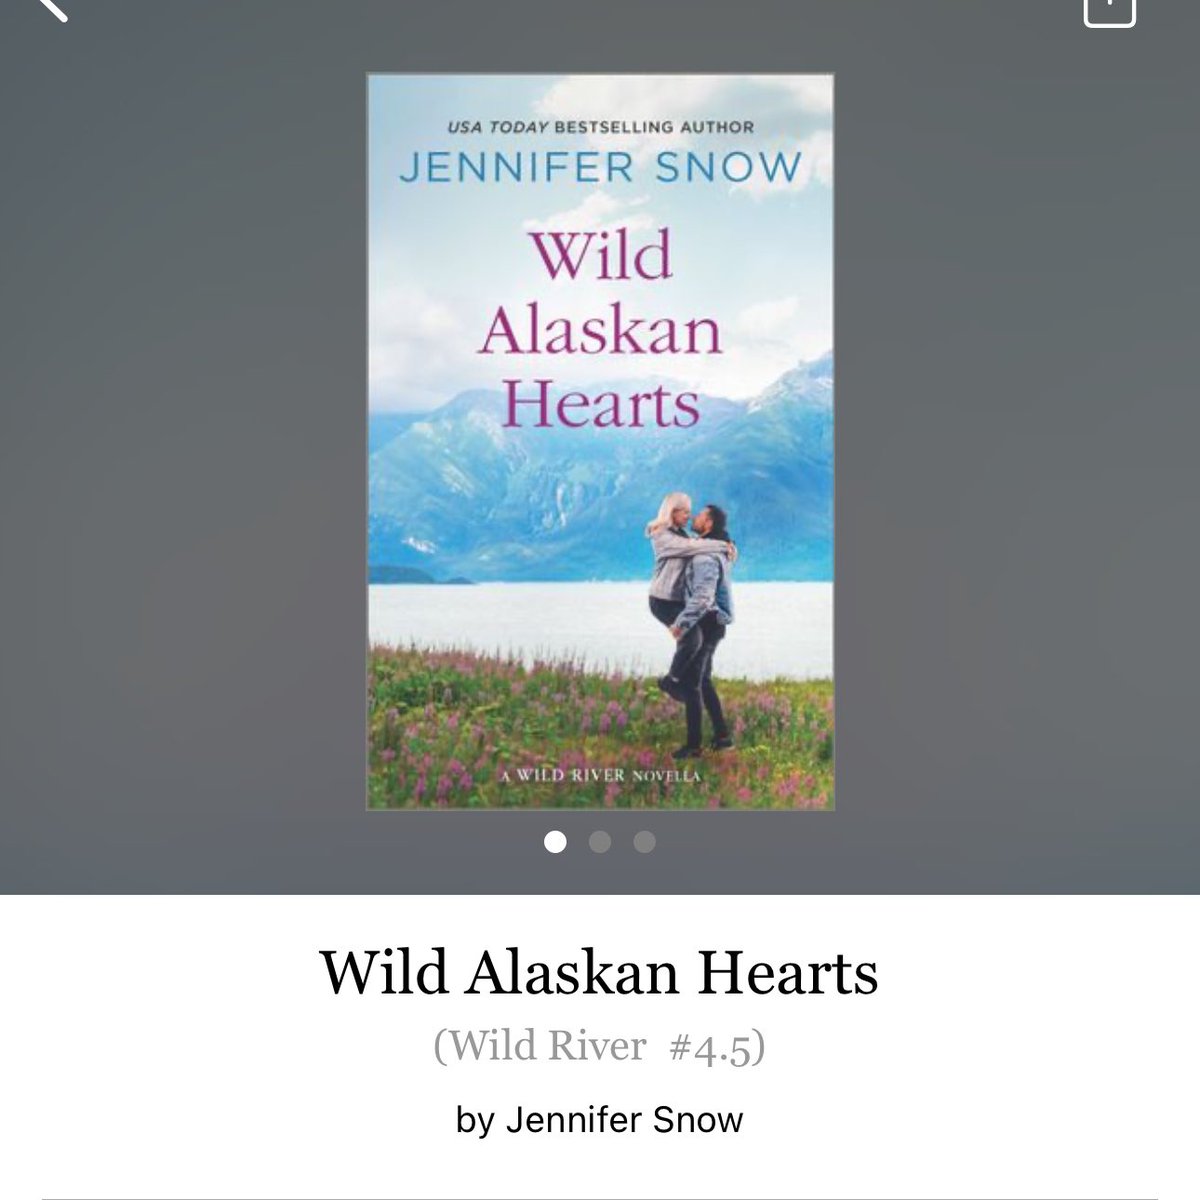 Wild Alaskan Hearts by Jennifer Snow 

#WildAlaskanHearts by #JenniferSnow #6273 #6chapters #44pages #422of400 #Series #Book #59fo15 #WildRiverSeries #Book3.5of6 #ArronAndAlisha #april2024 #clearingoffreadingshelves #whatsnext #readitquick